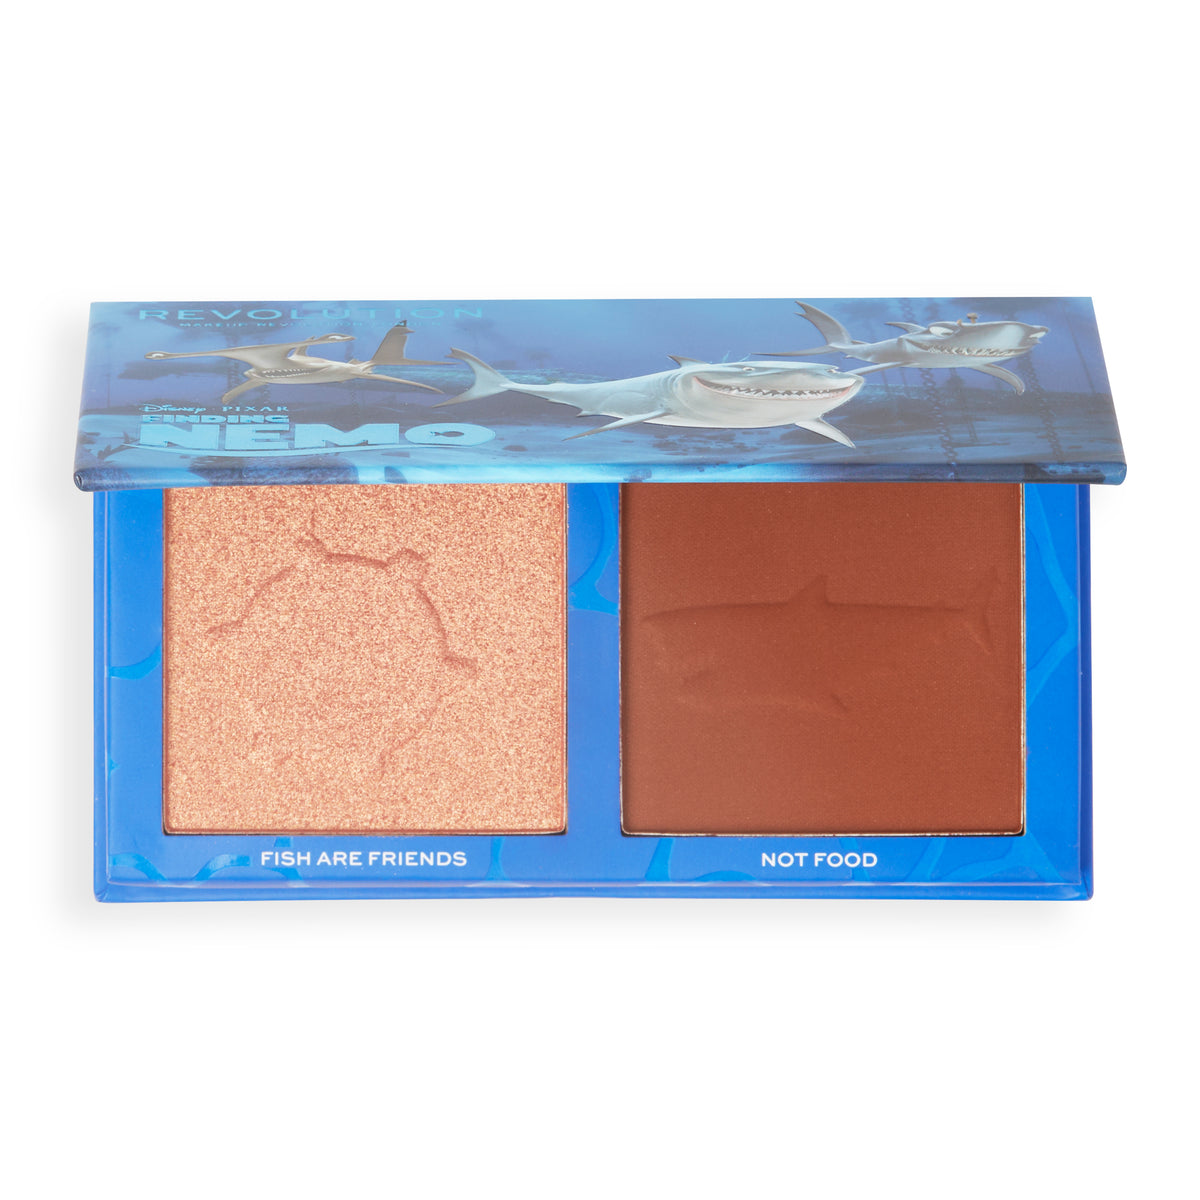 DISNEY PIXAR’S FINDING NEMO AND REVOLUTION FISH ARE FRIENDS BRONZER AND HIGHLIGHTER PALETTE - OUTLET